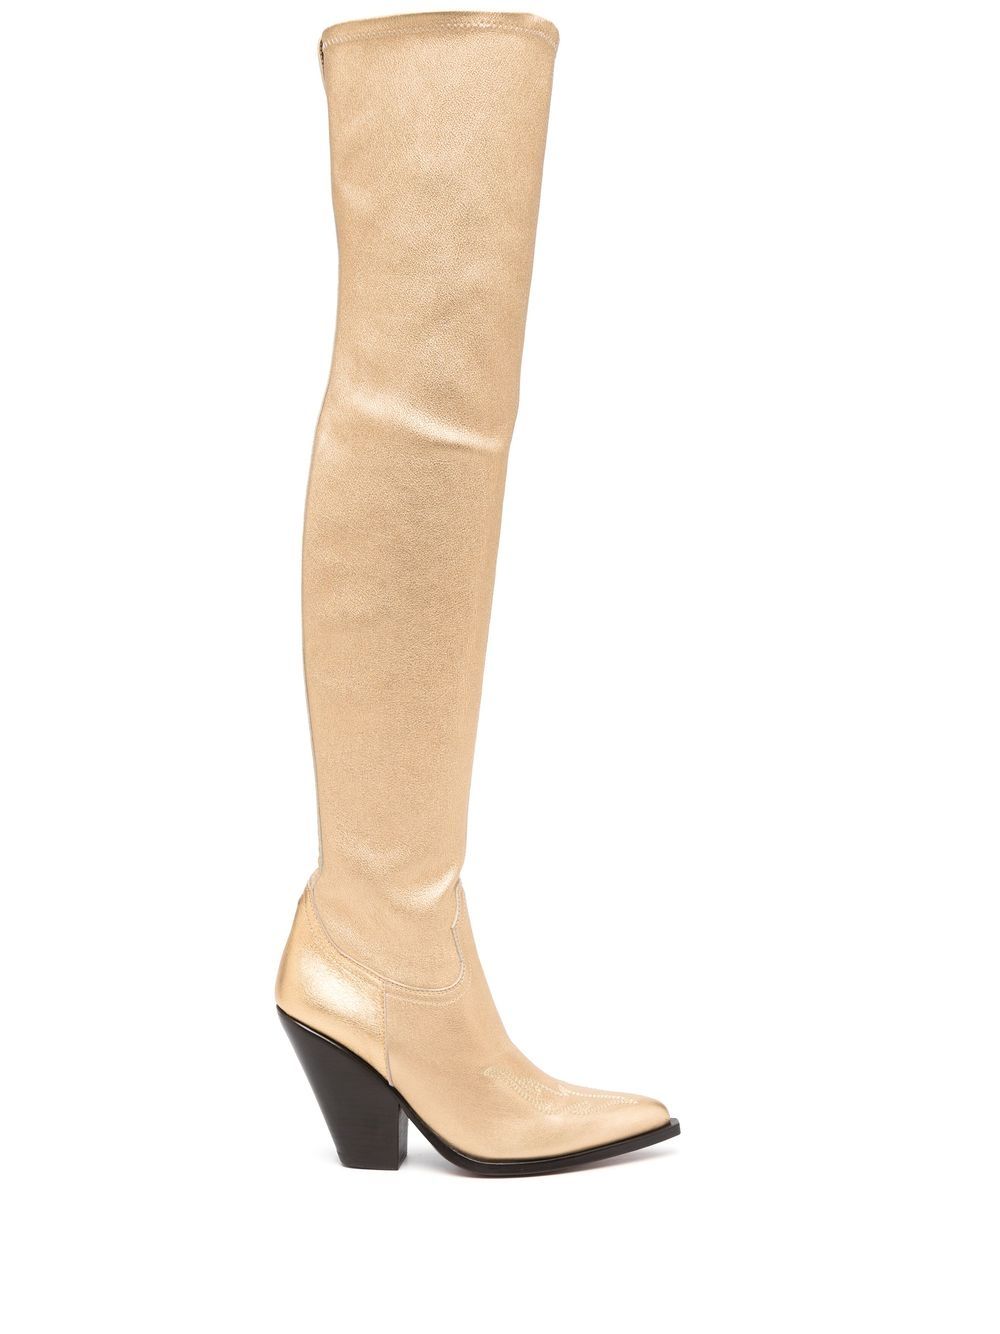 Gold Boots for Women - WARDROB